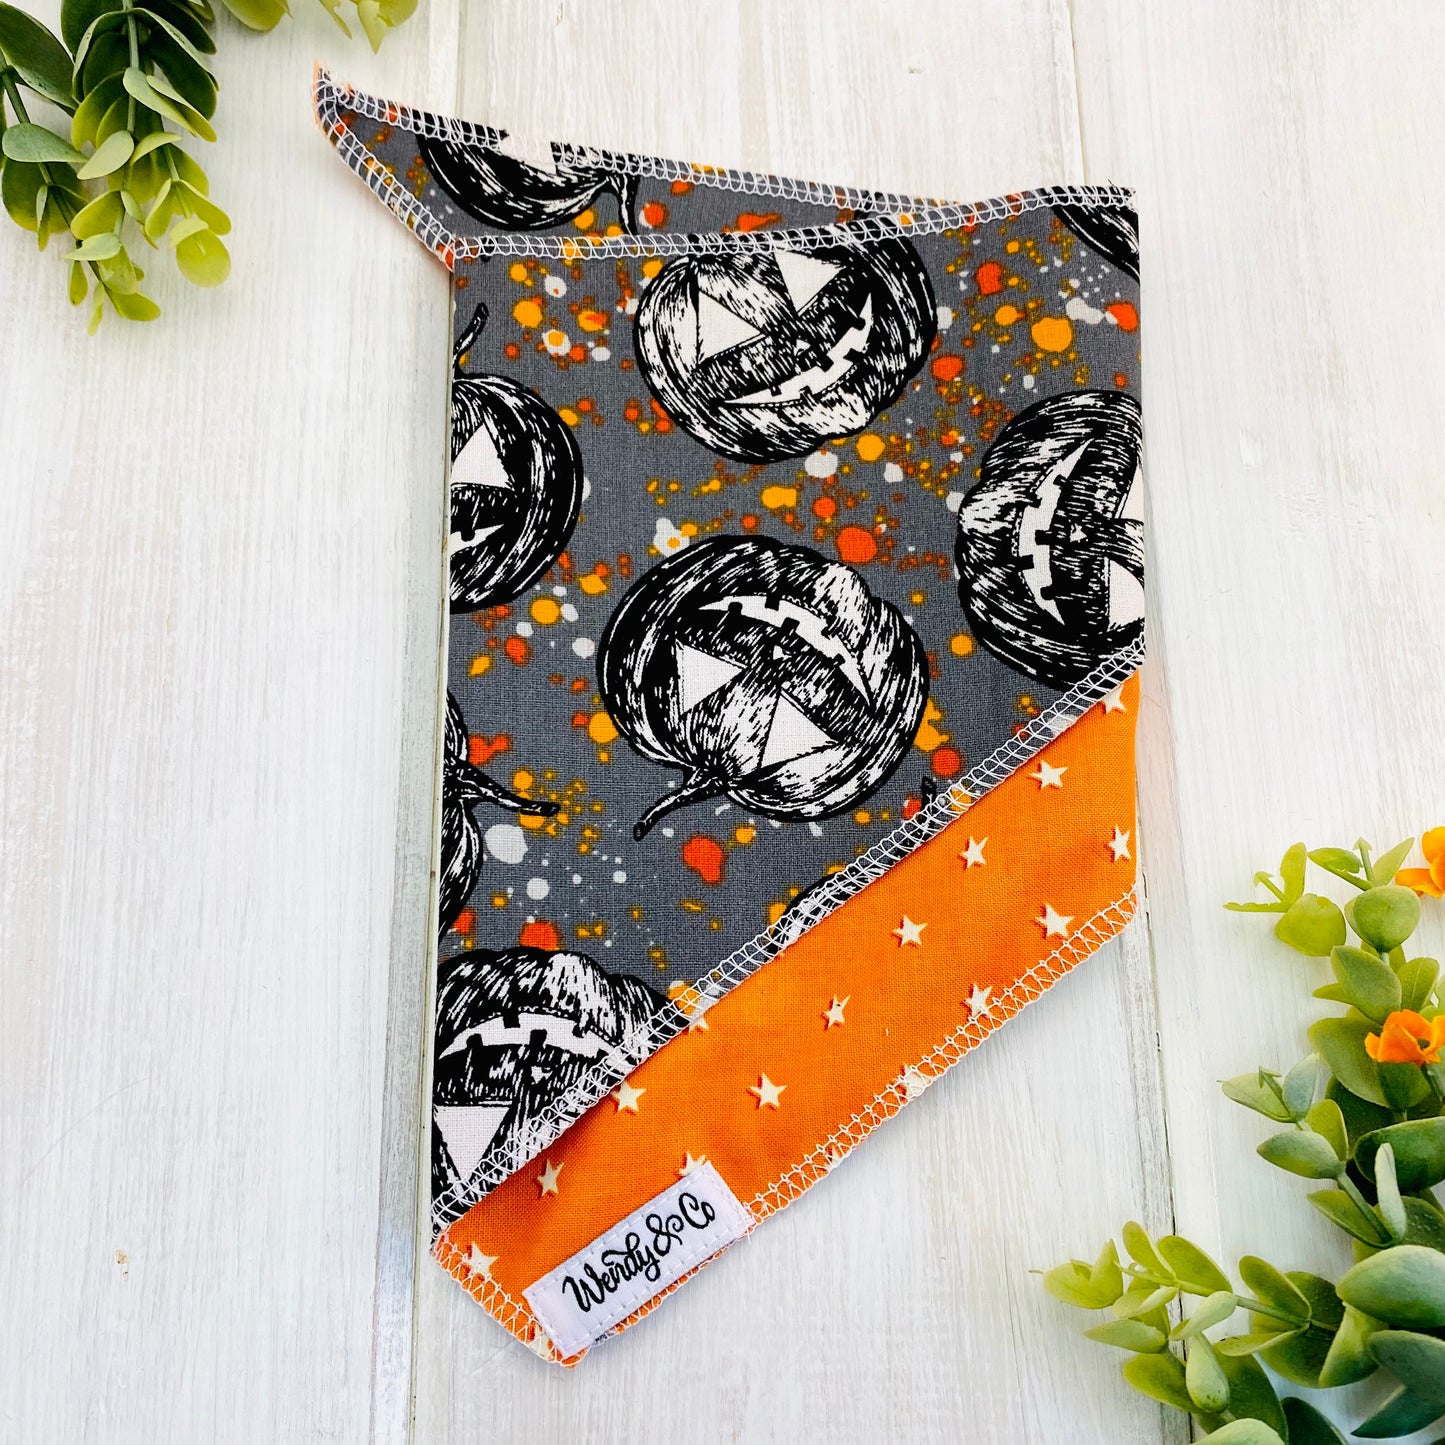 Tie on Halloween dog bandana with spooky pumpkins and glow in the dark stars.